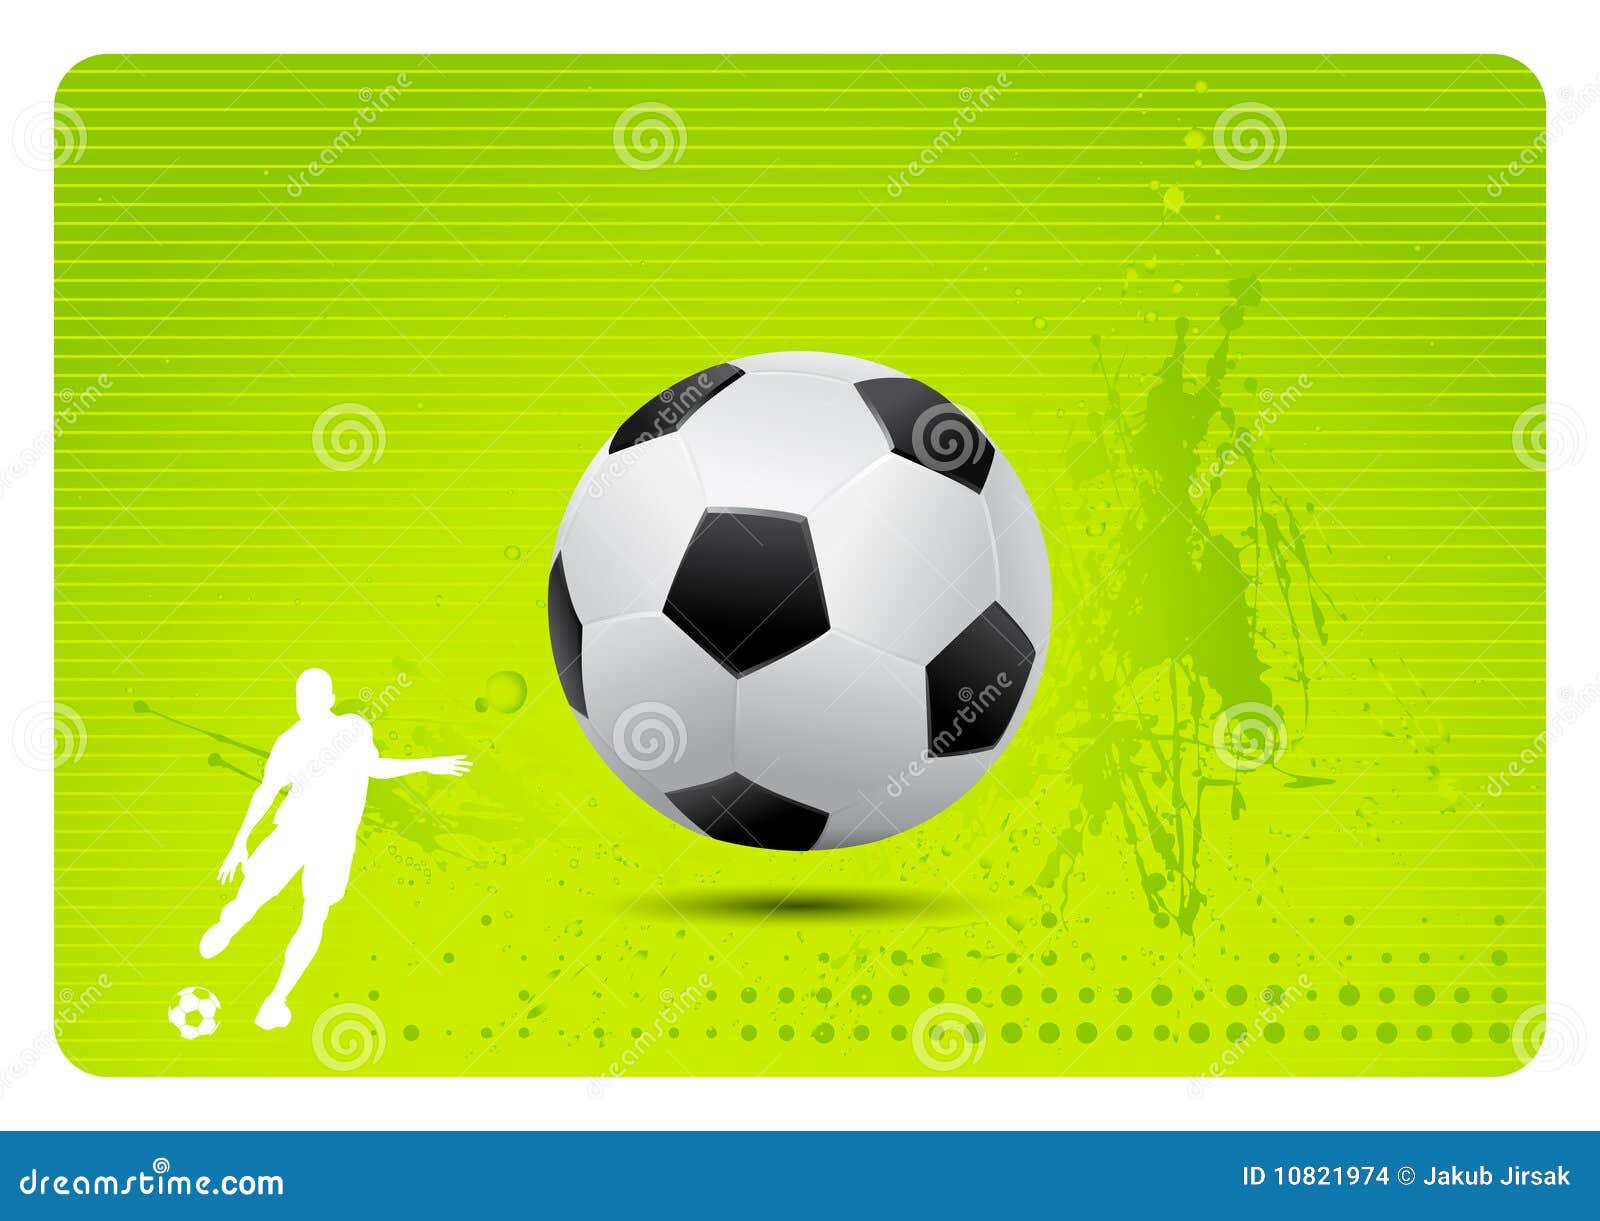 Soccer background (vector) stock vector. Illustration of isolated